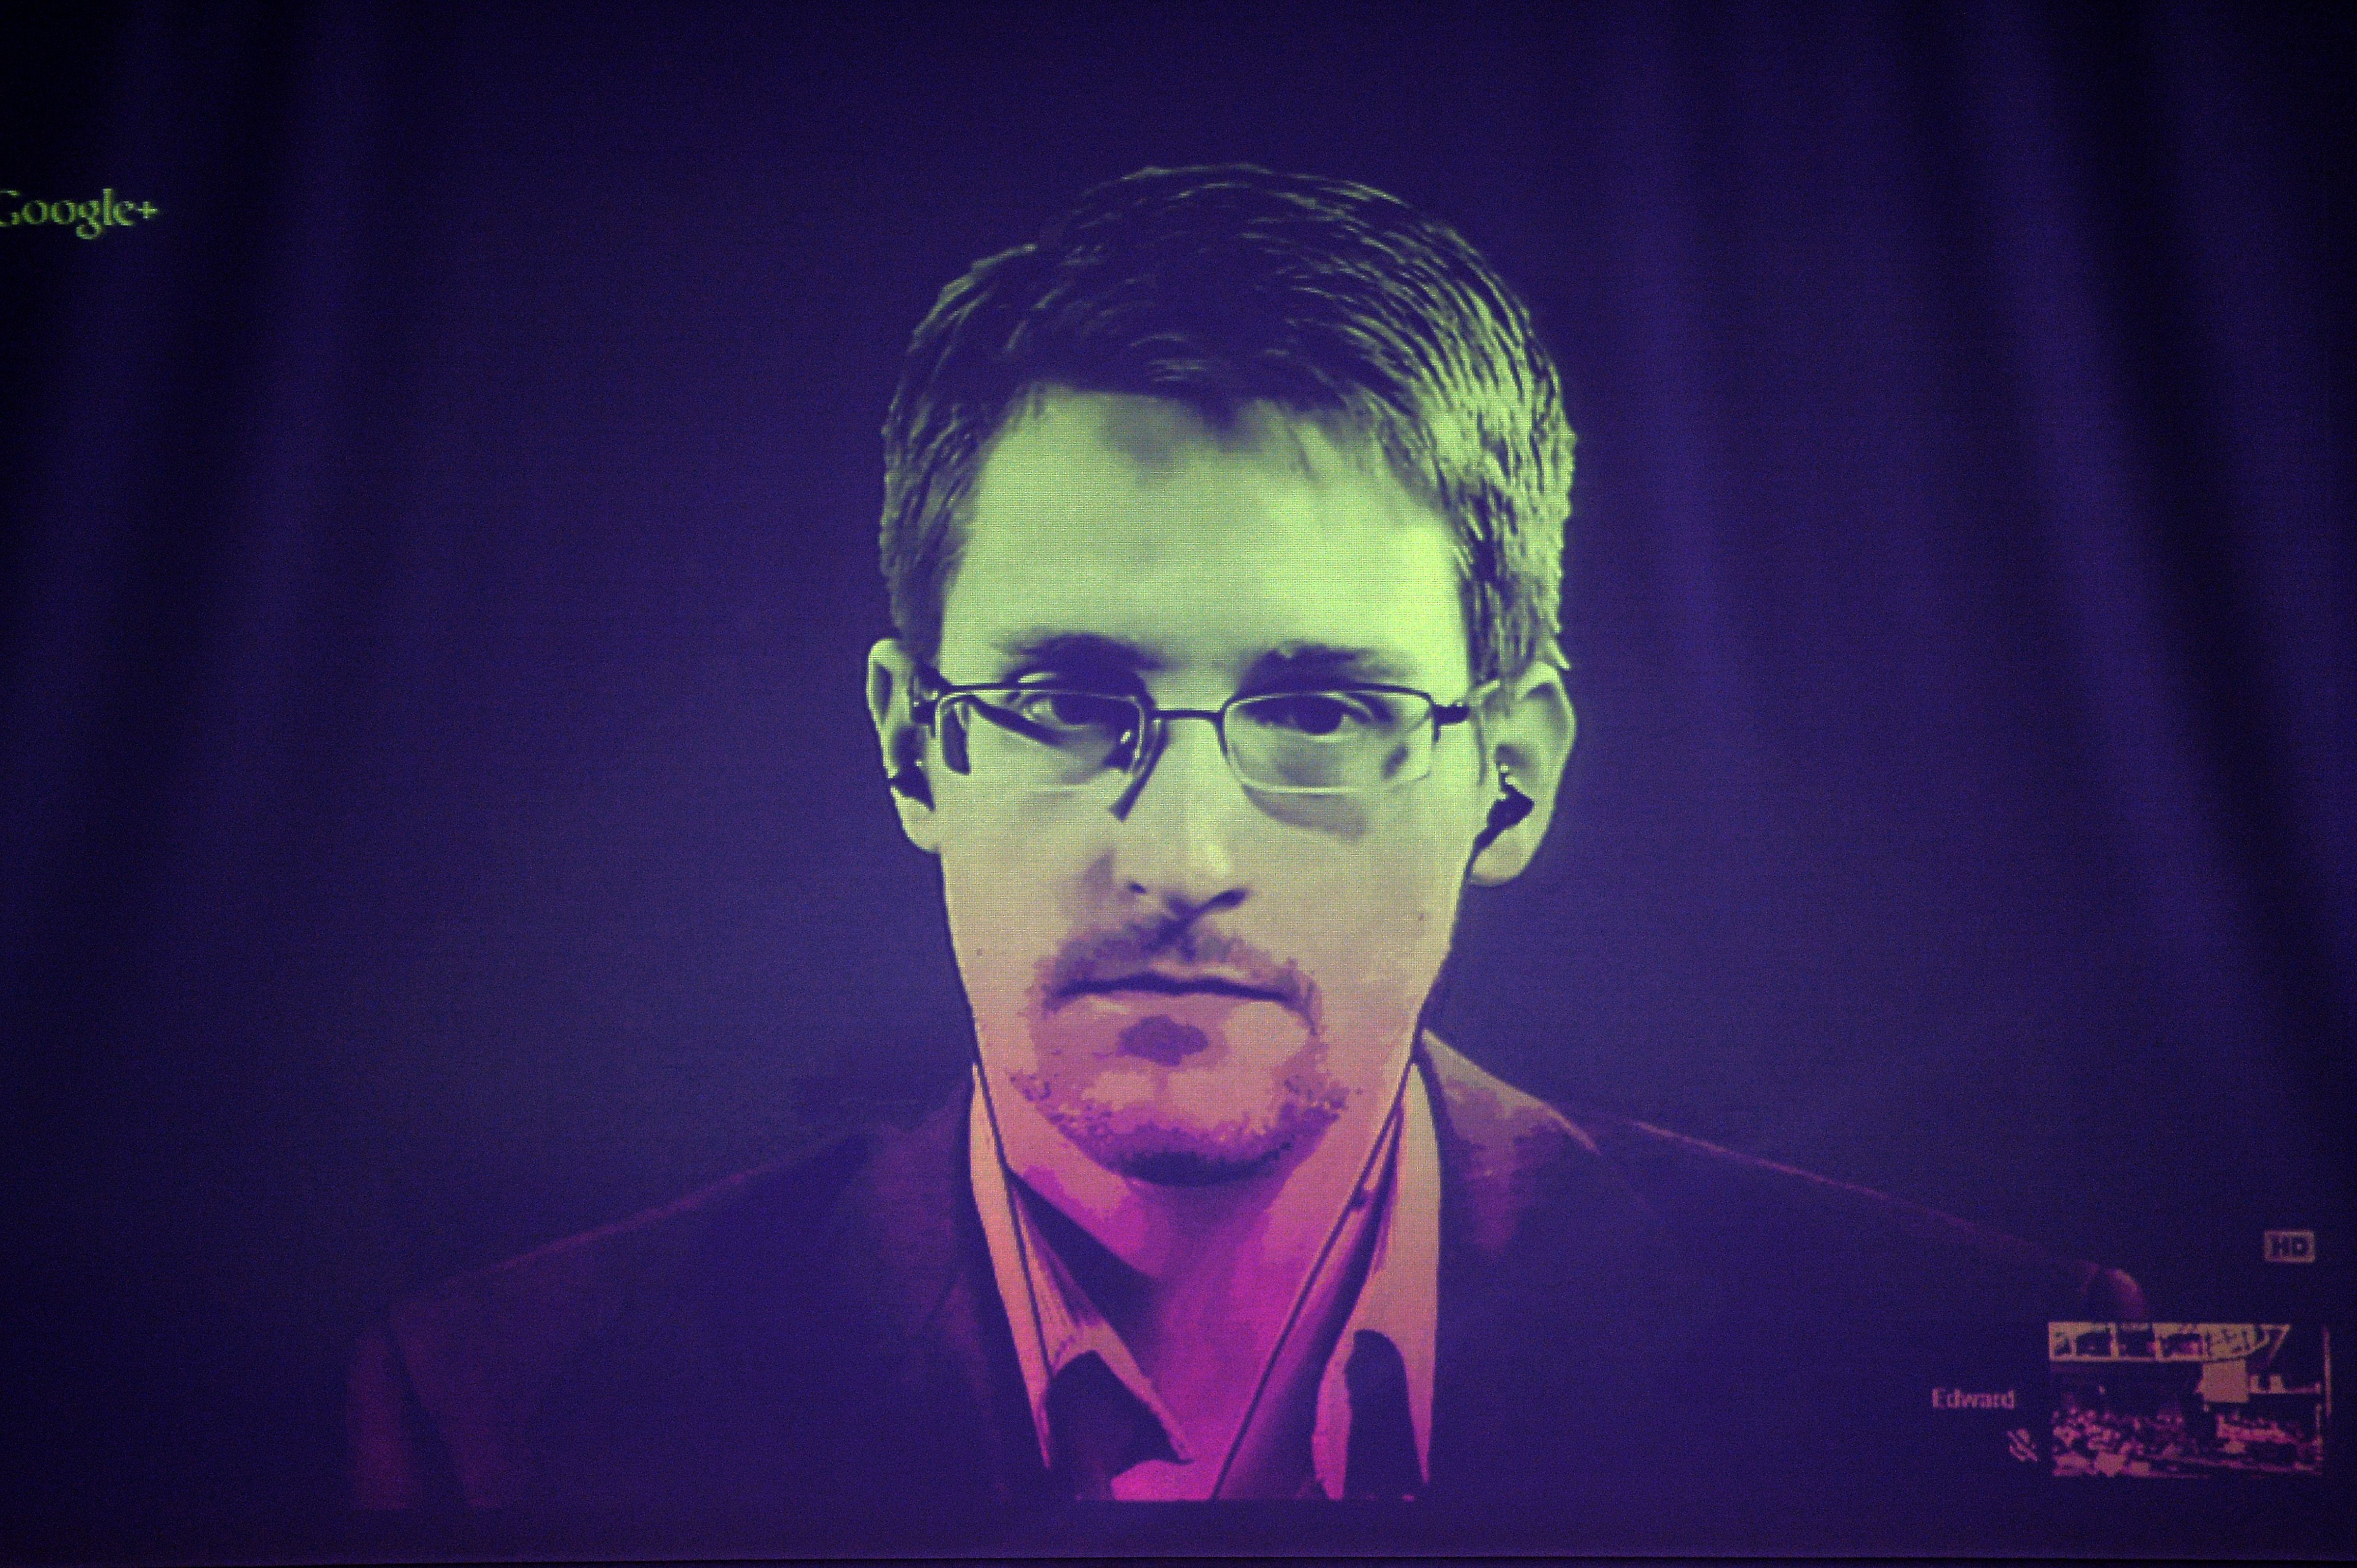 US National Security Agency (NSA) whistleblower Edward Snowden speaks to European officials via videoconference during a parliamentary hearing on improving the protection of whistleblowers, at the Council of Europe in Strasbourg, eastern France, on June 24, 2014. (Frederick Florin—AFP/Getty Images)